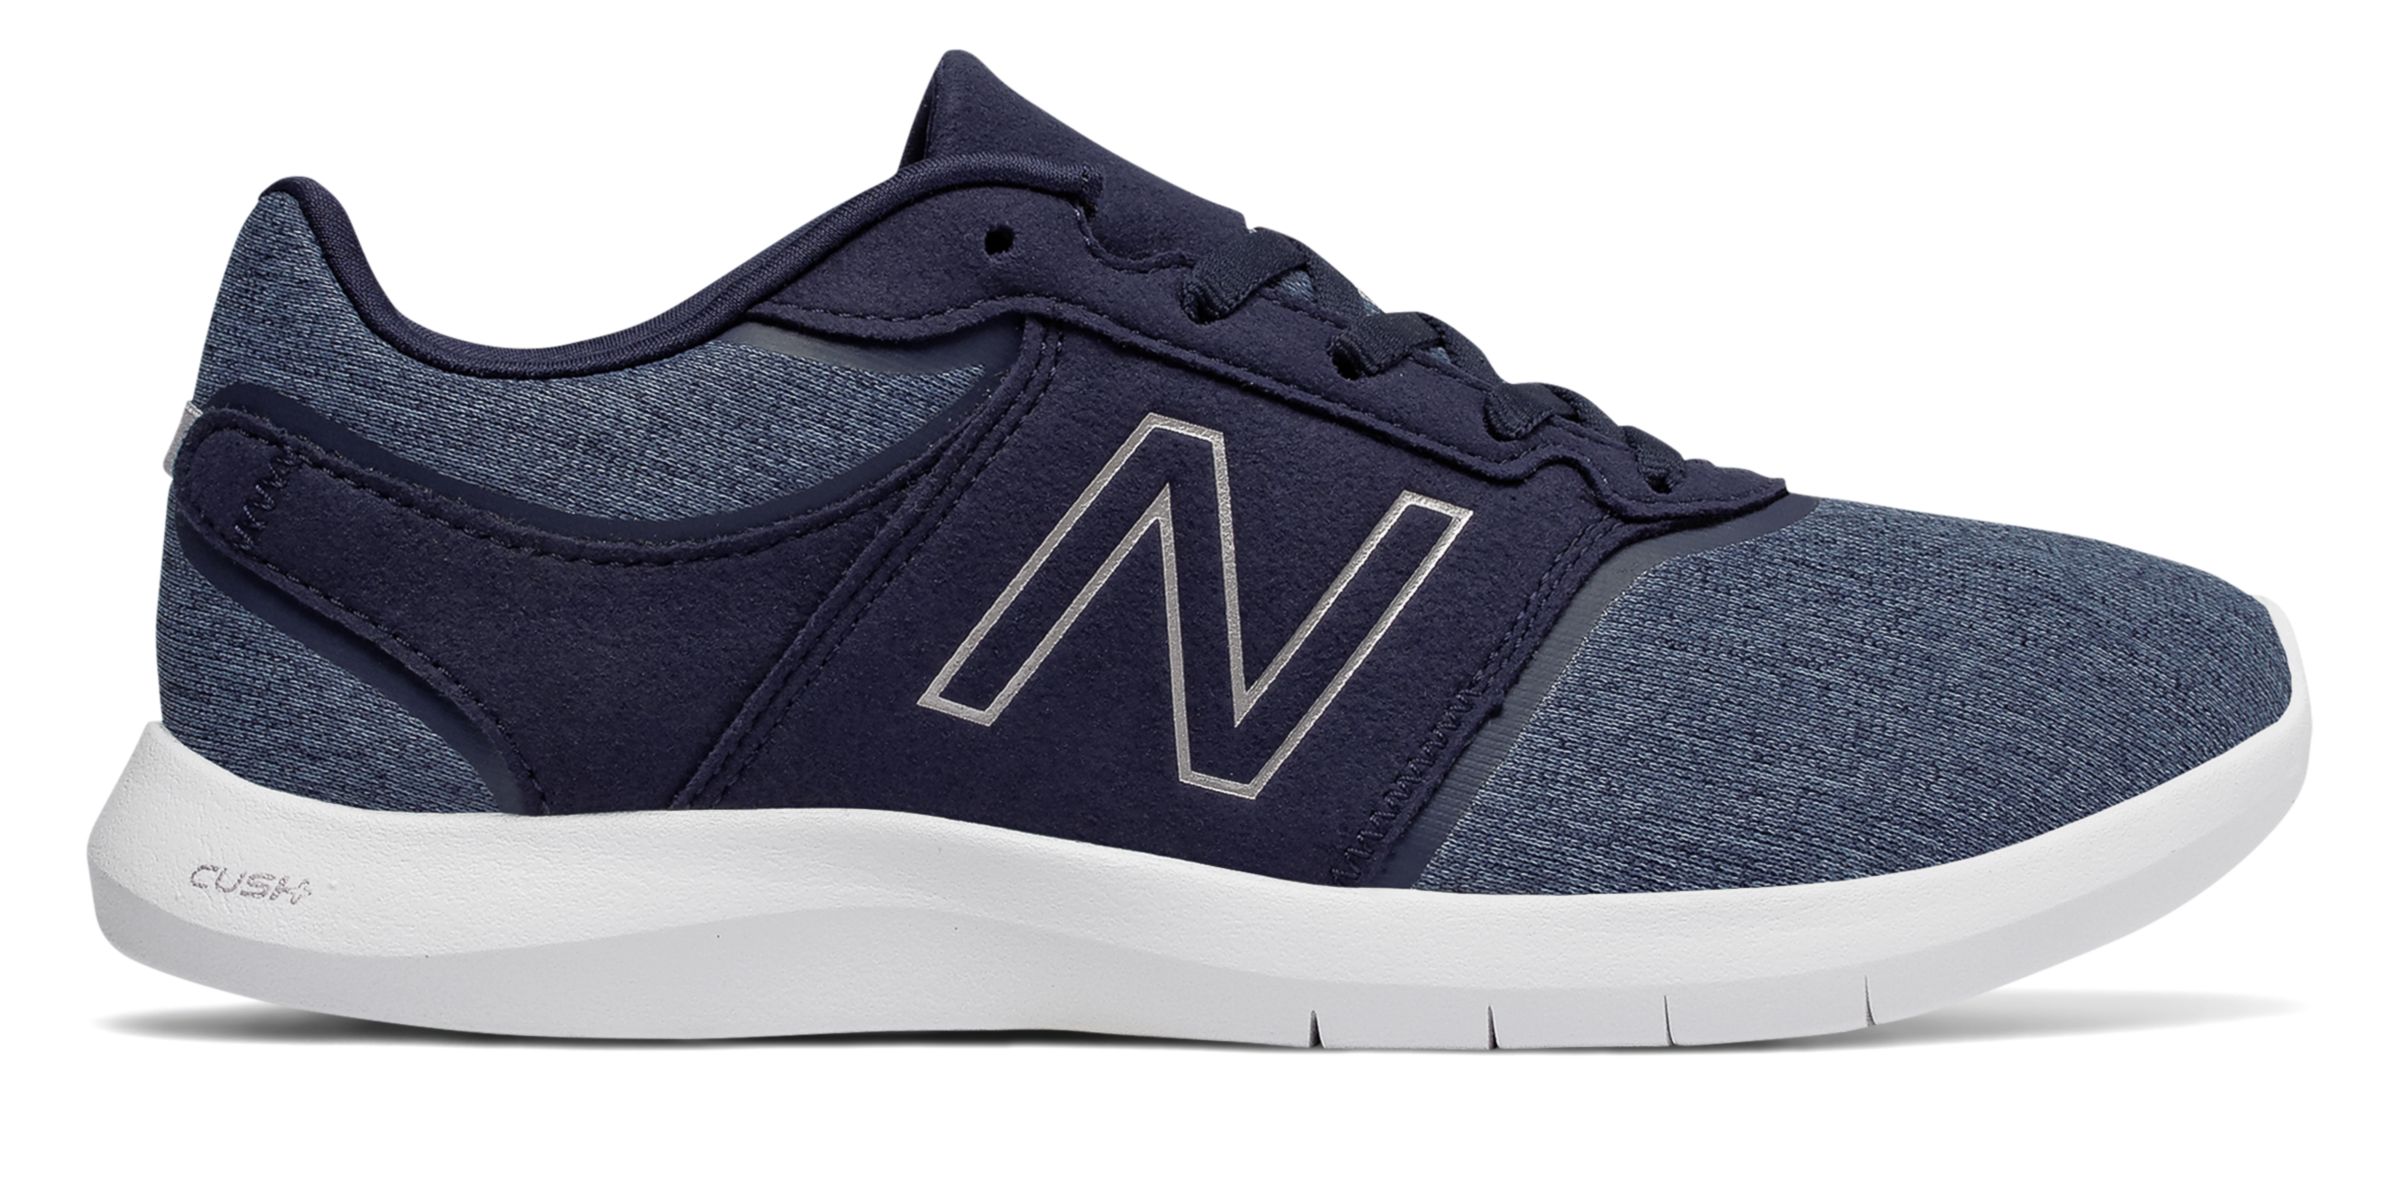 New Balance WL415 on Sale - Discounts Up to 20% Off on WL415BL at Joe's New  Balance Outlet